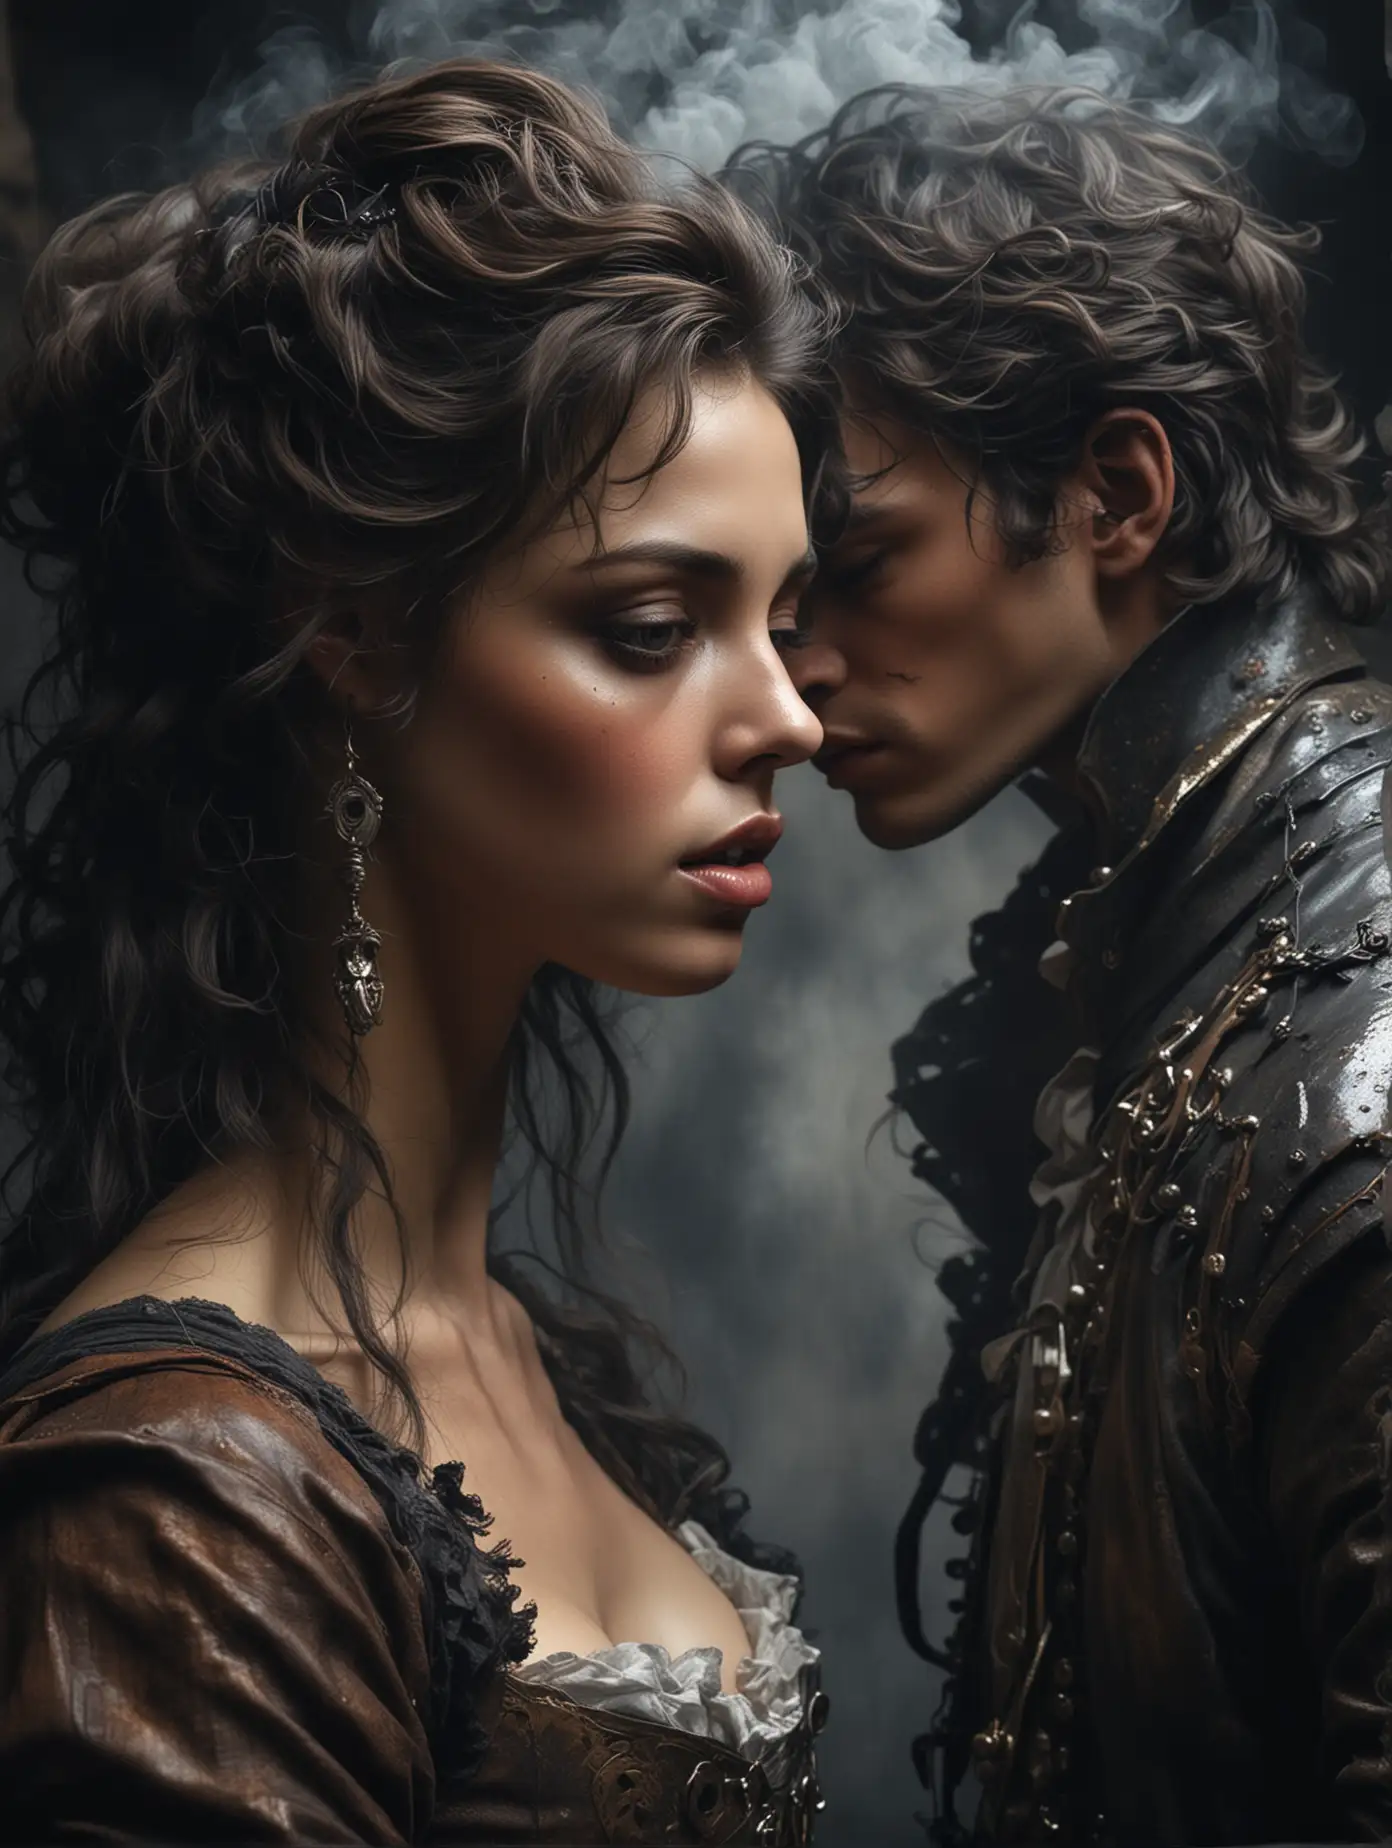 Make exactly like the image, a beautiful woman head to head with a young men like the image; Louis Royo art in a dark 17 century forge; dark misty atmosphere, air filled with smoke in the background, very close view of their faces, high-detailed, photo realistic picture